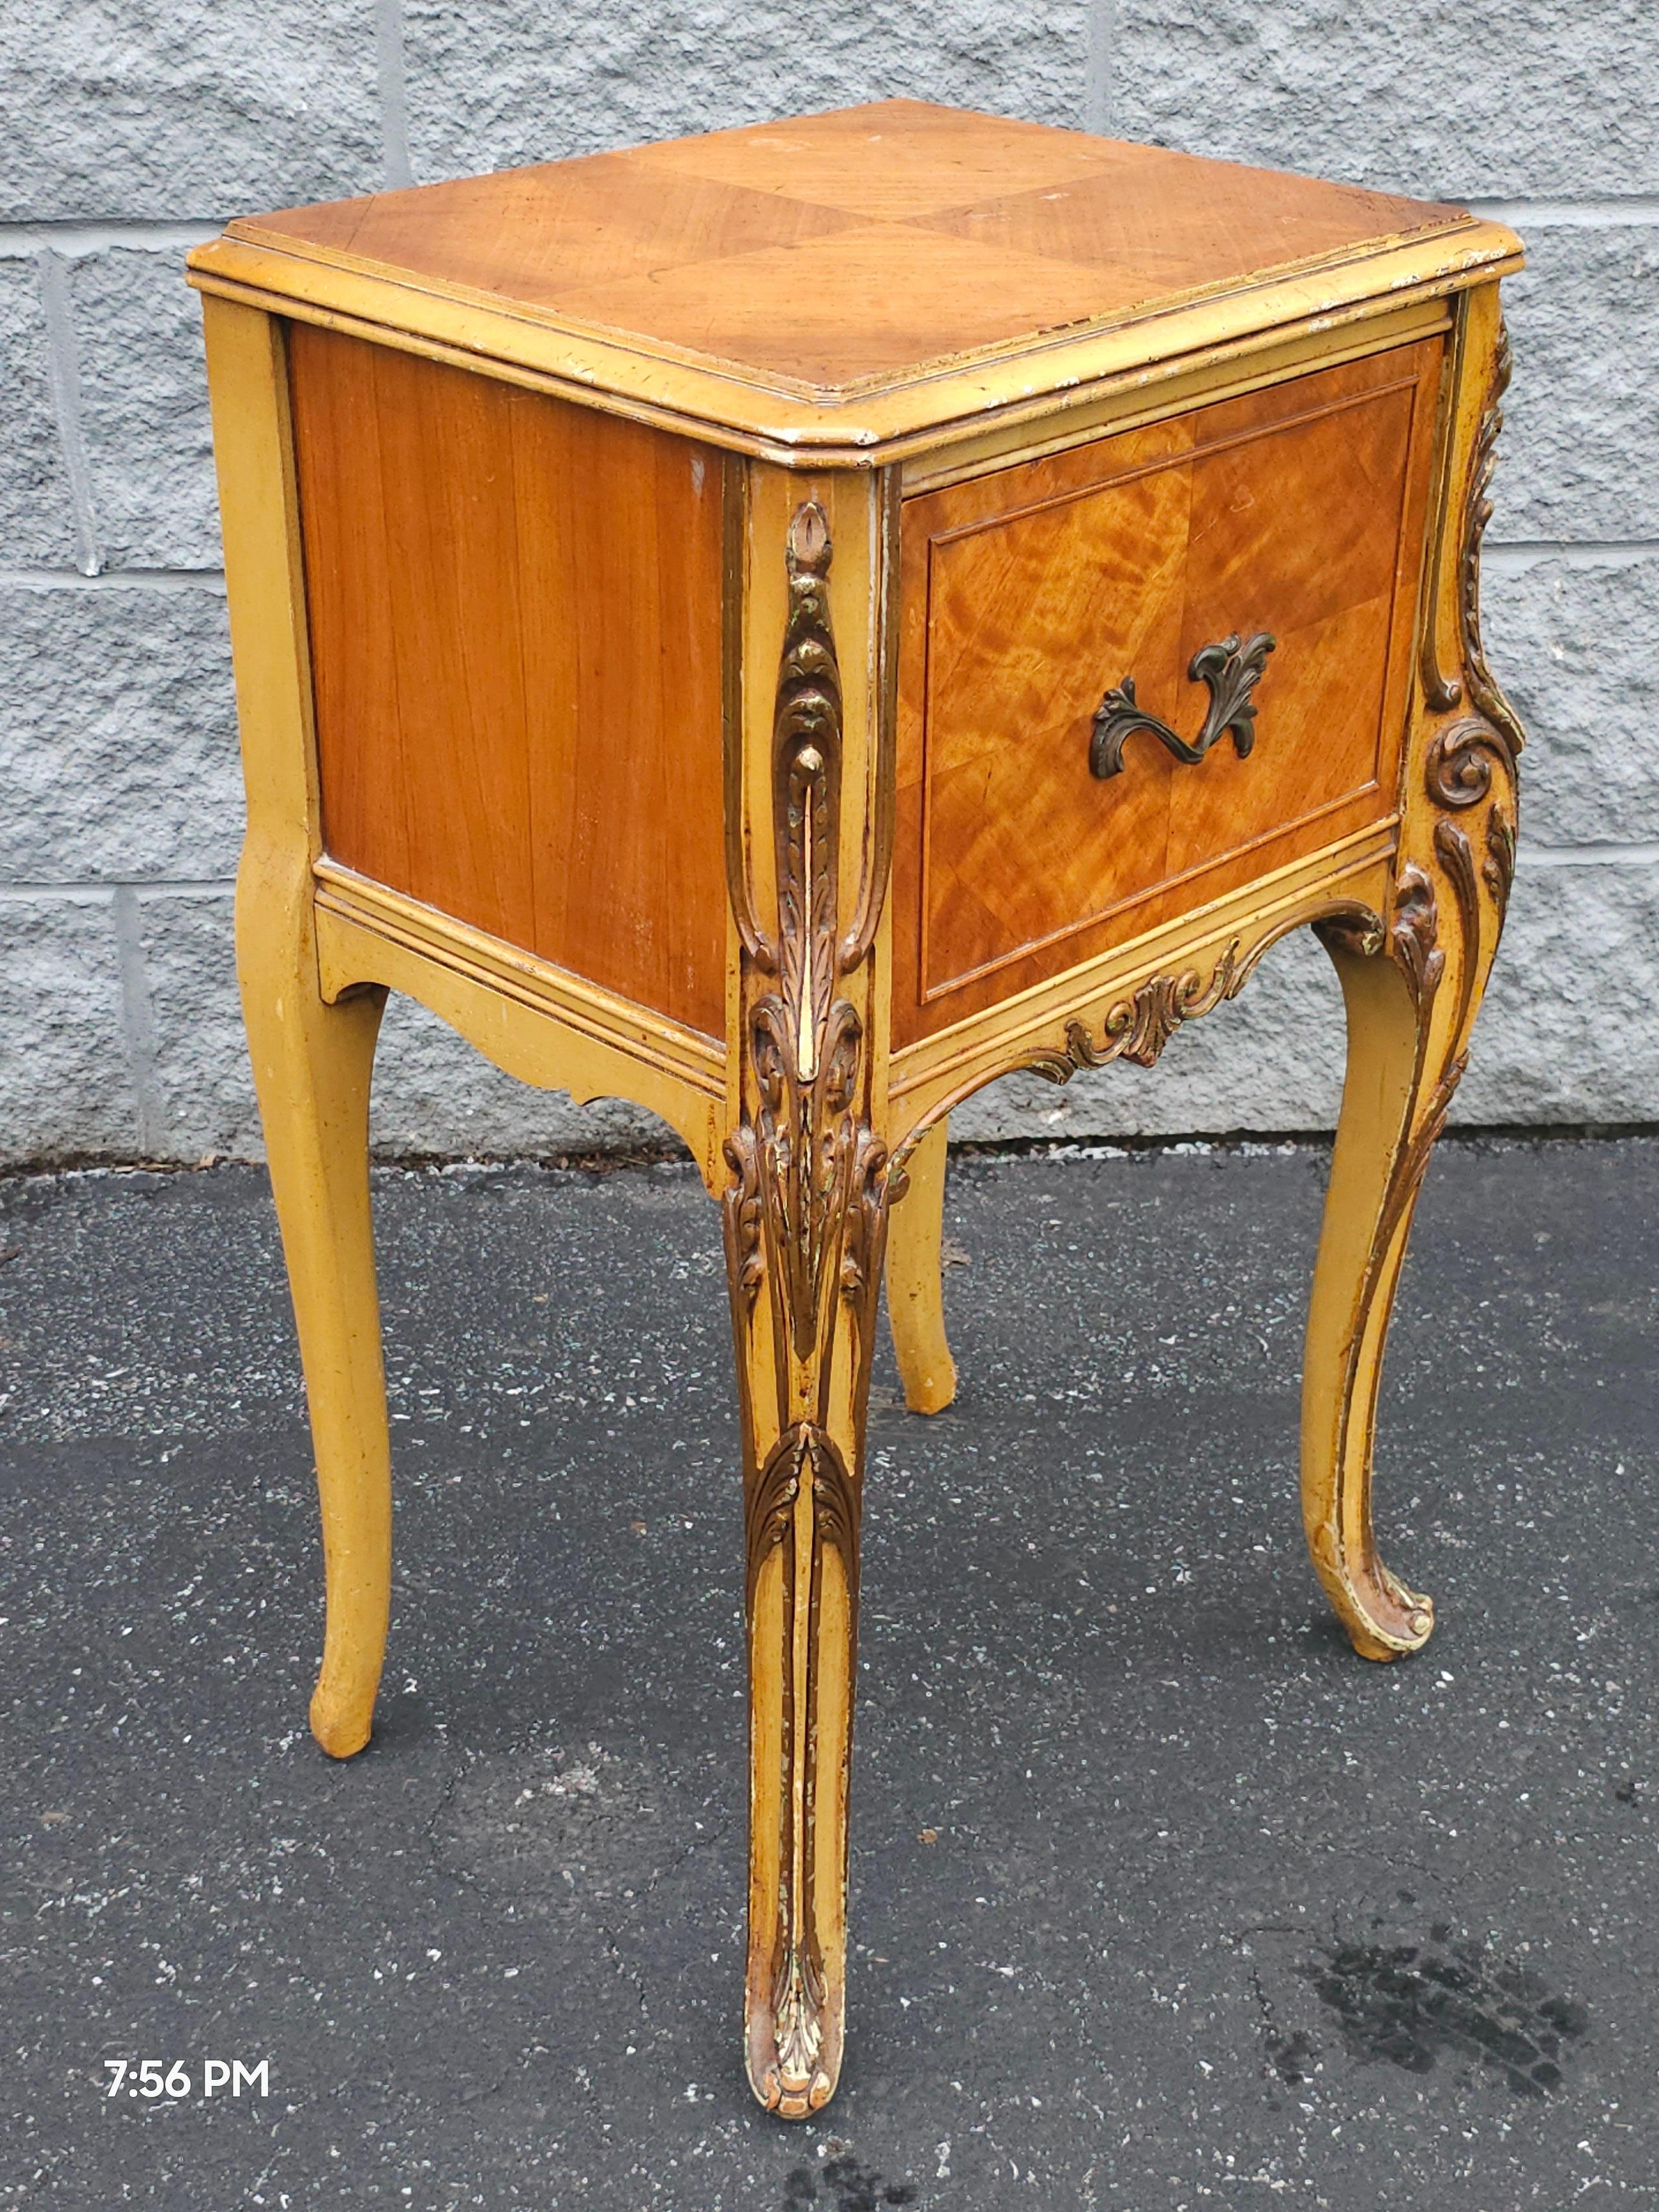 Late 19th Century Louis XVI Style Provincial Walnut Bedside Cabinet w Glass Top In Good Condition For Sale In Germantown, MD